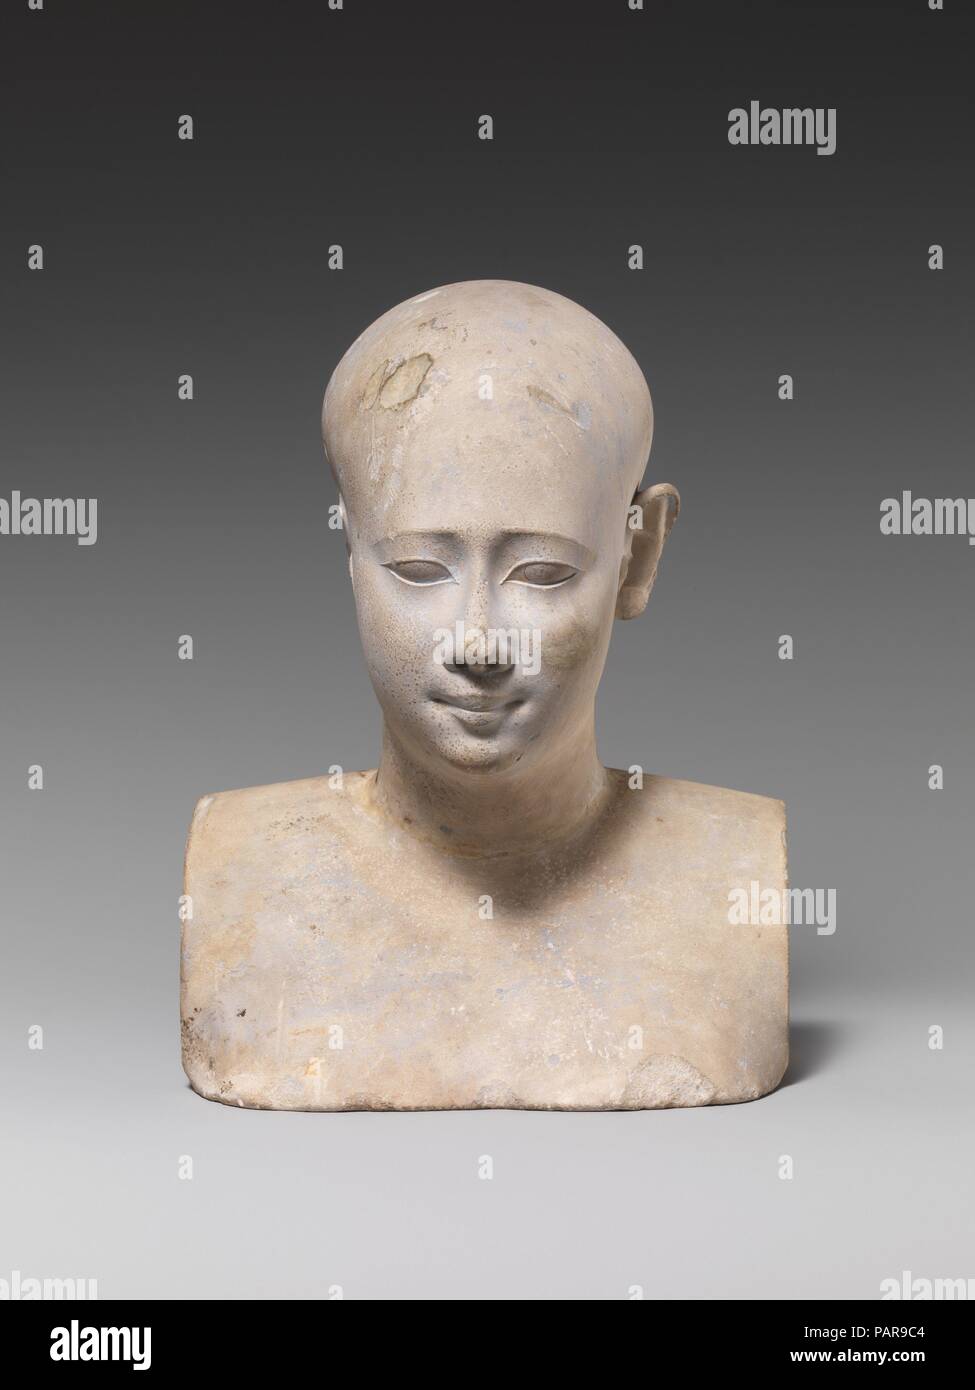 Bust of a priestly figure. Dimensions: H. 19 cm (7 1/2 in); W